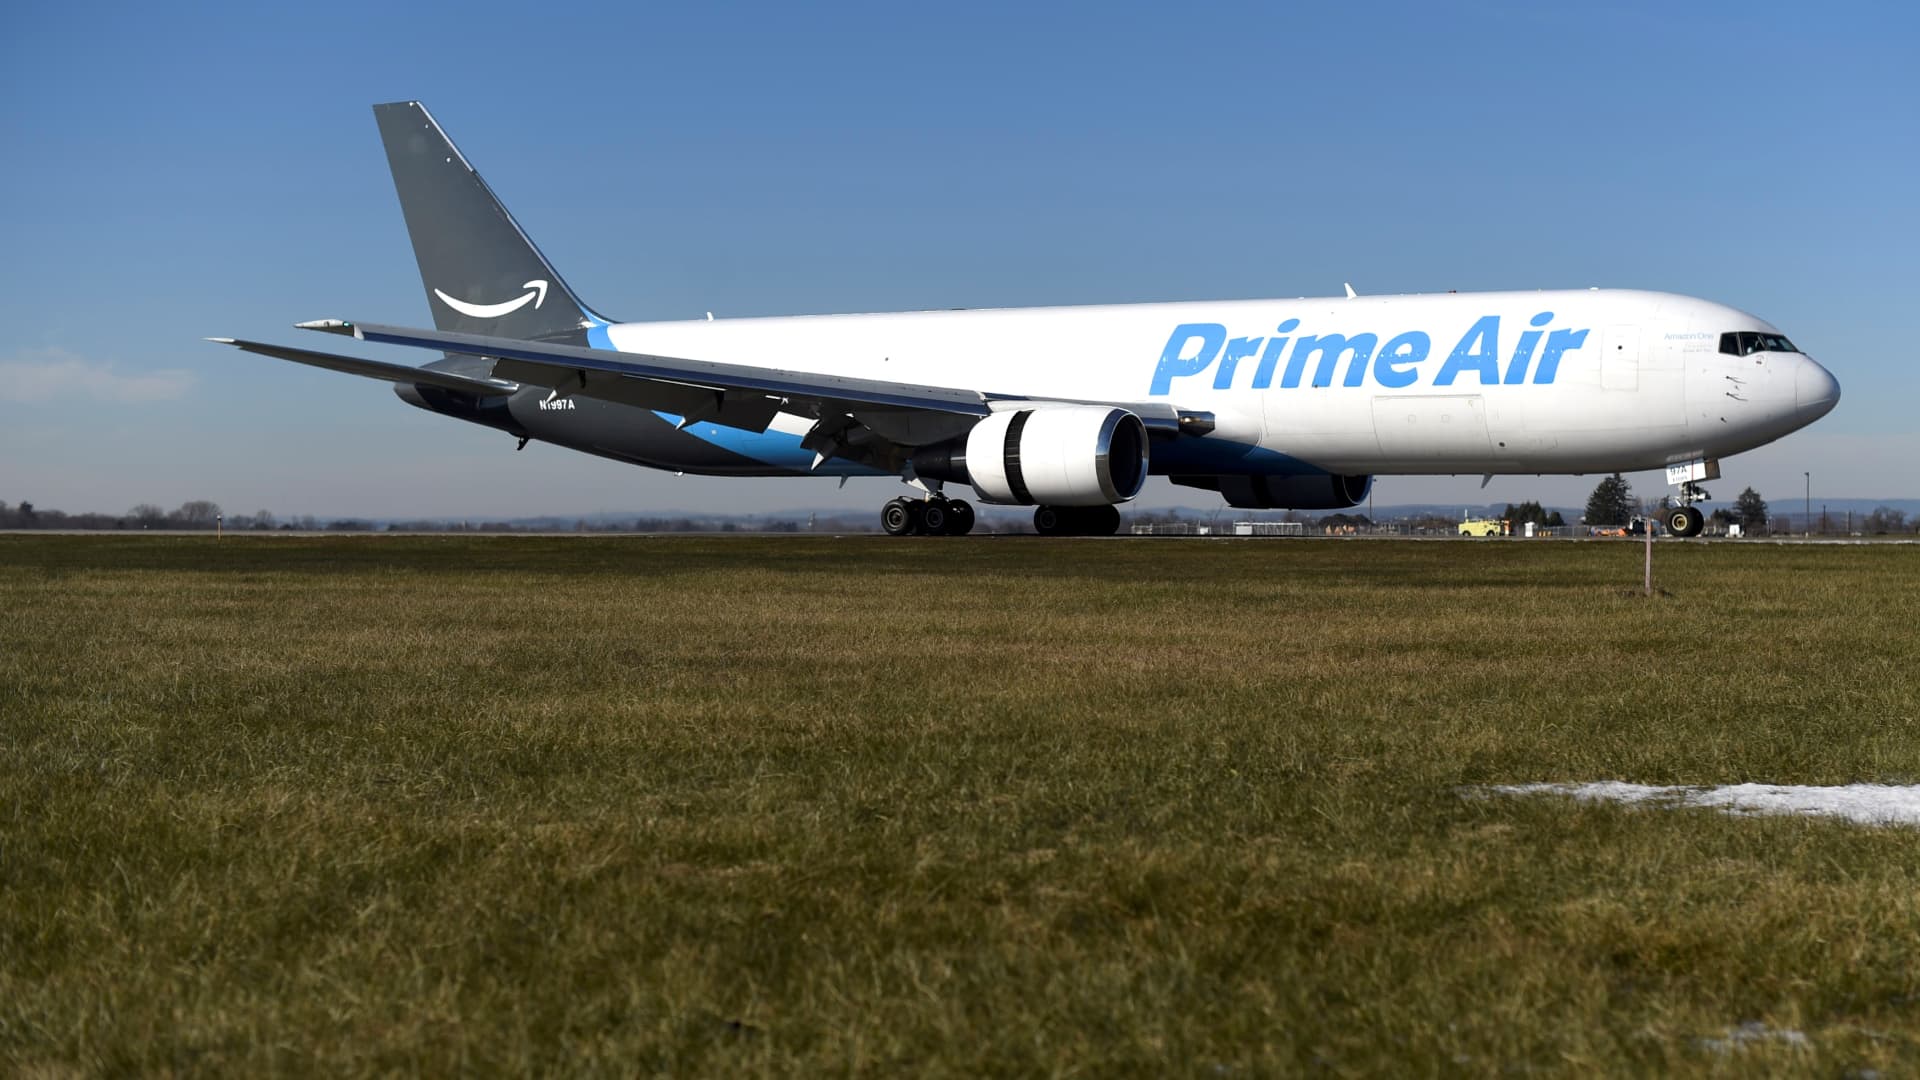 Amazon's air cargo head changes jobs, will now oversee workplace safety unit